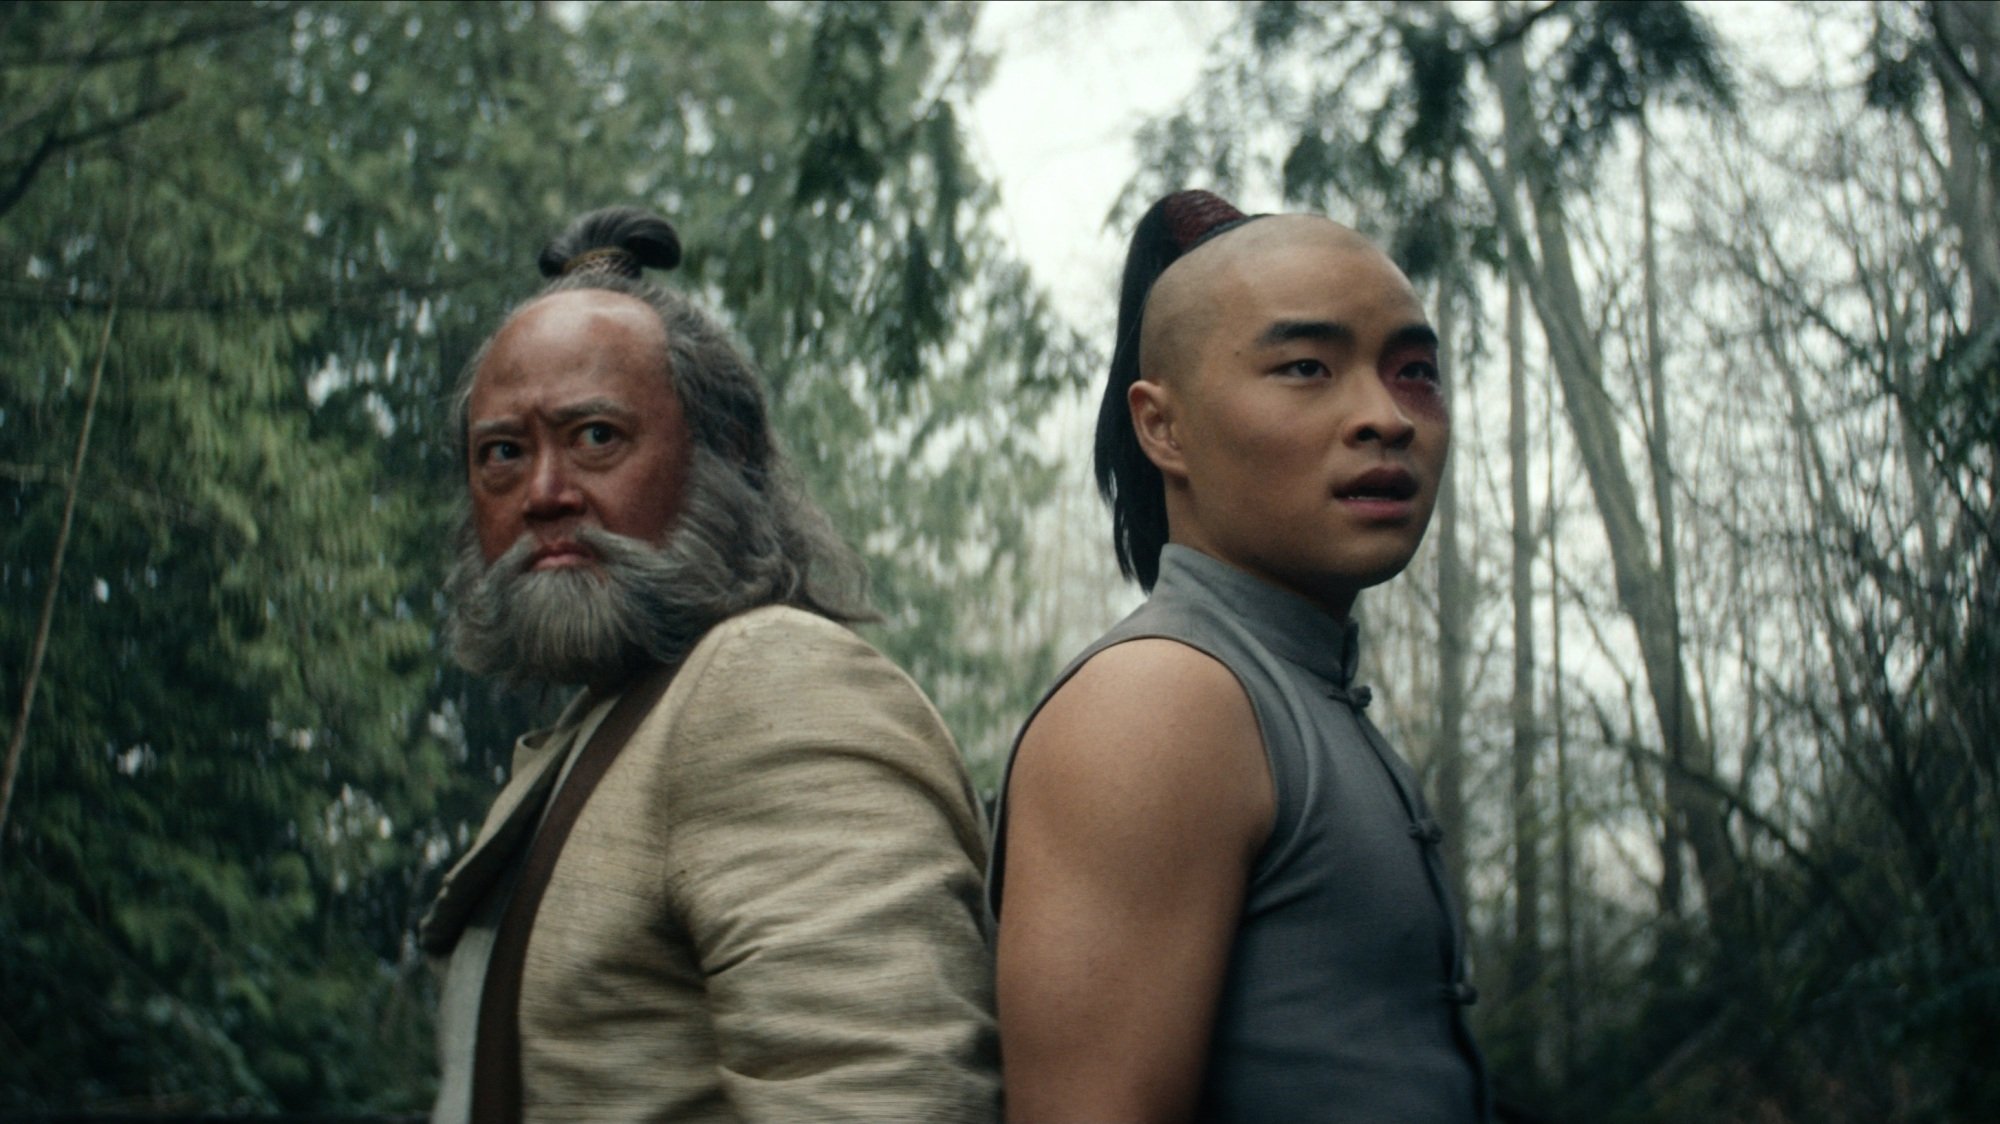 Iroh and Zuko stand back to back in a forest.